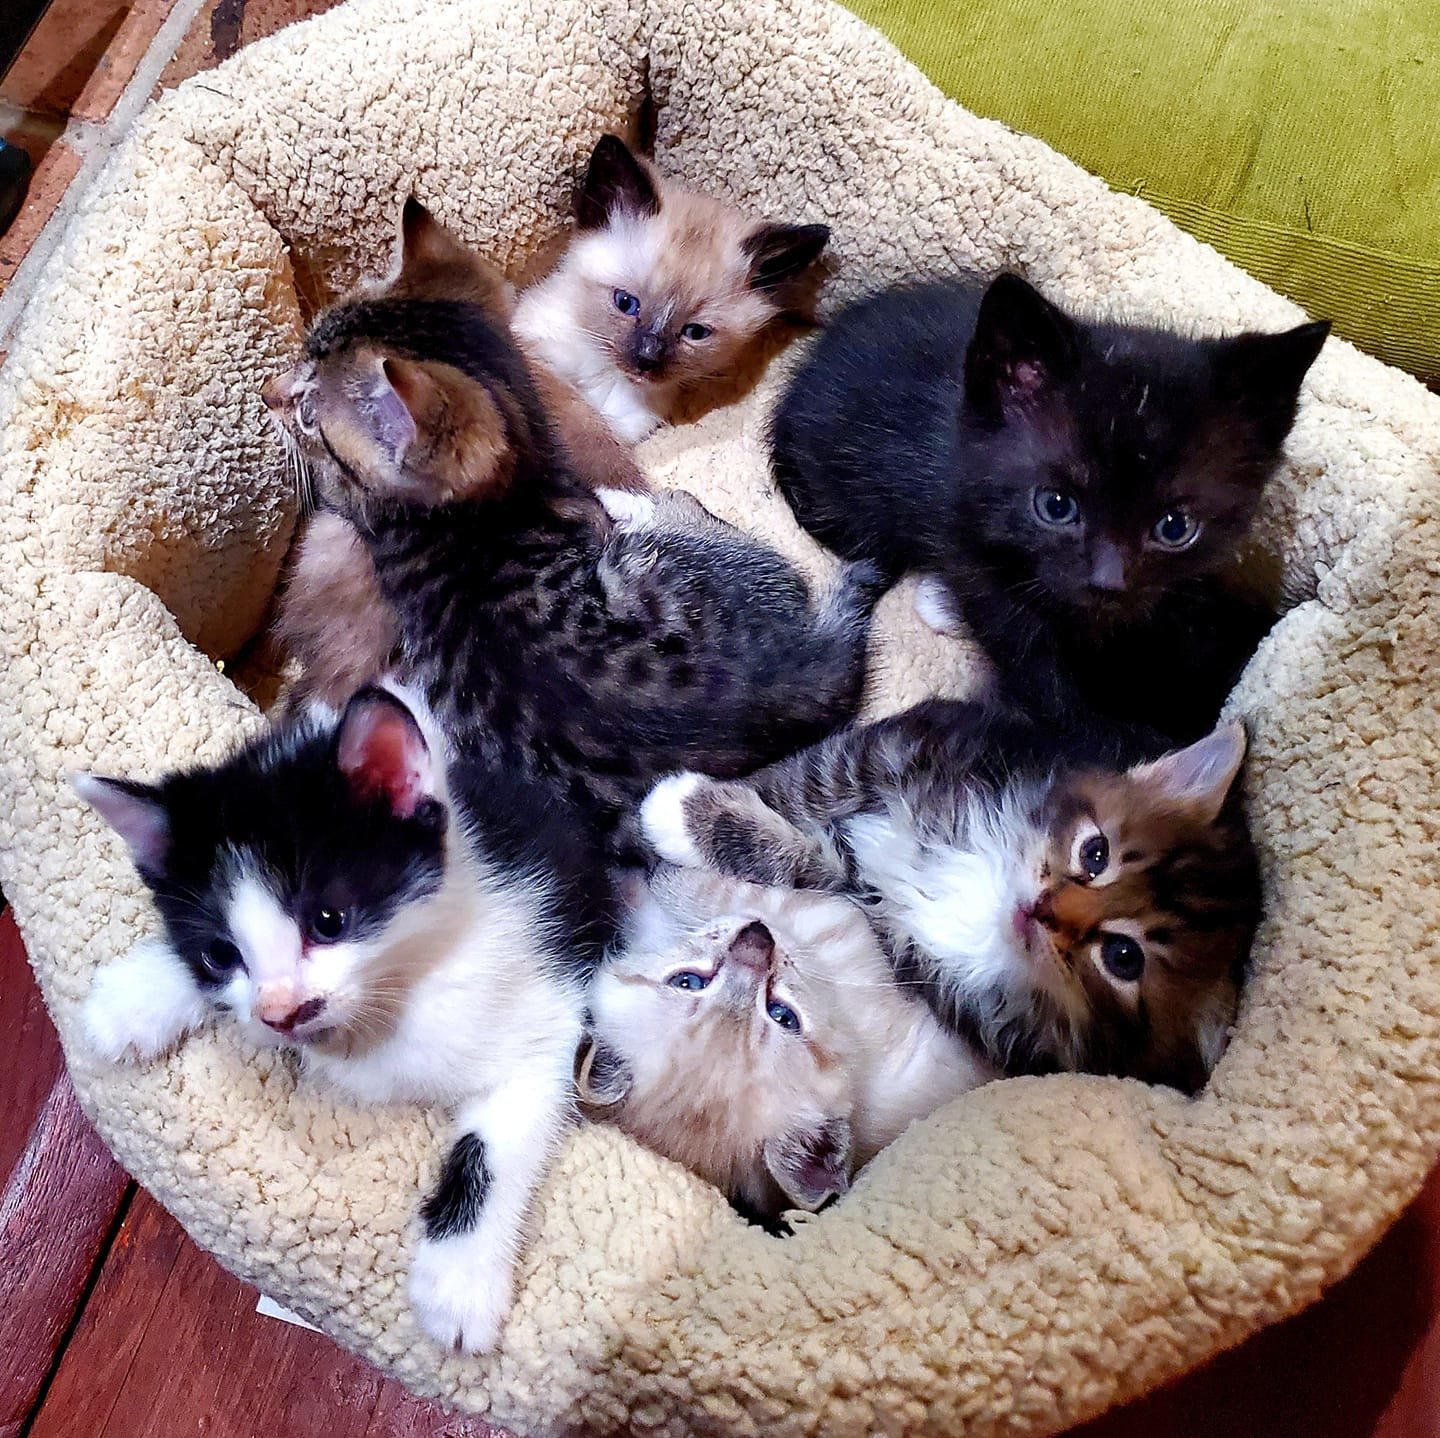 A litter of kittens is pictured.